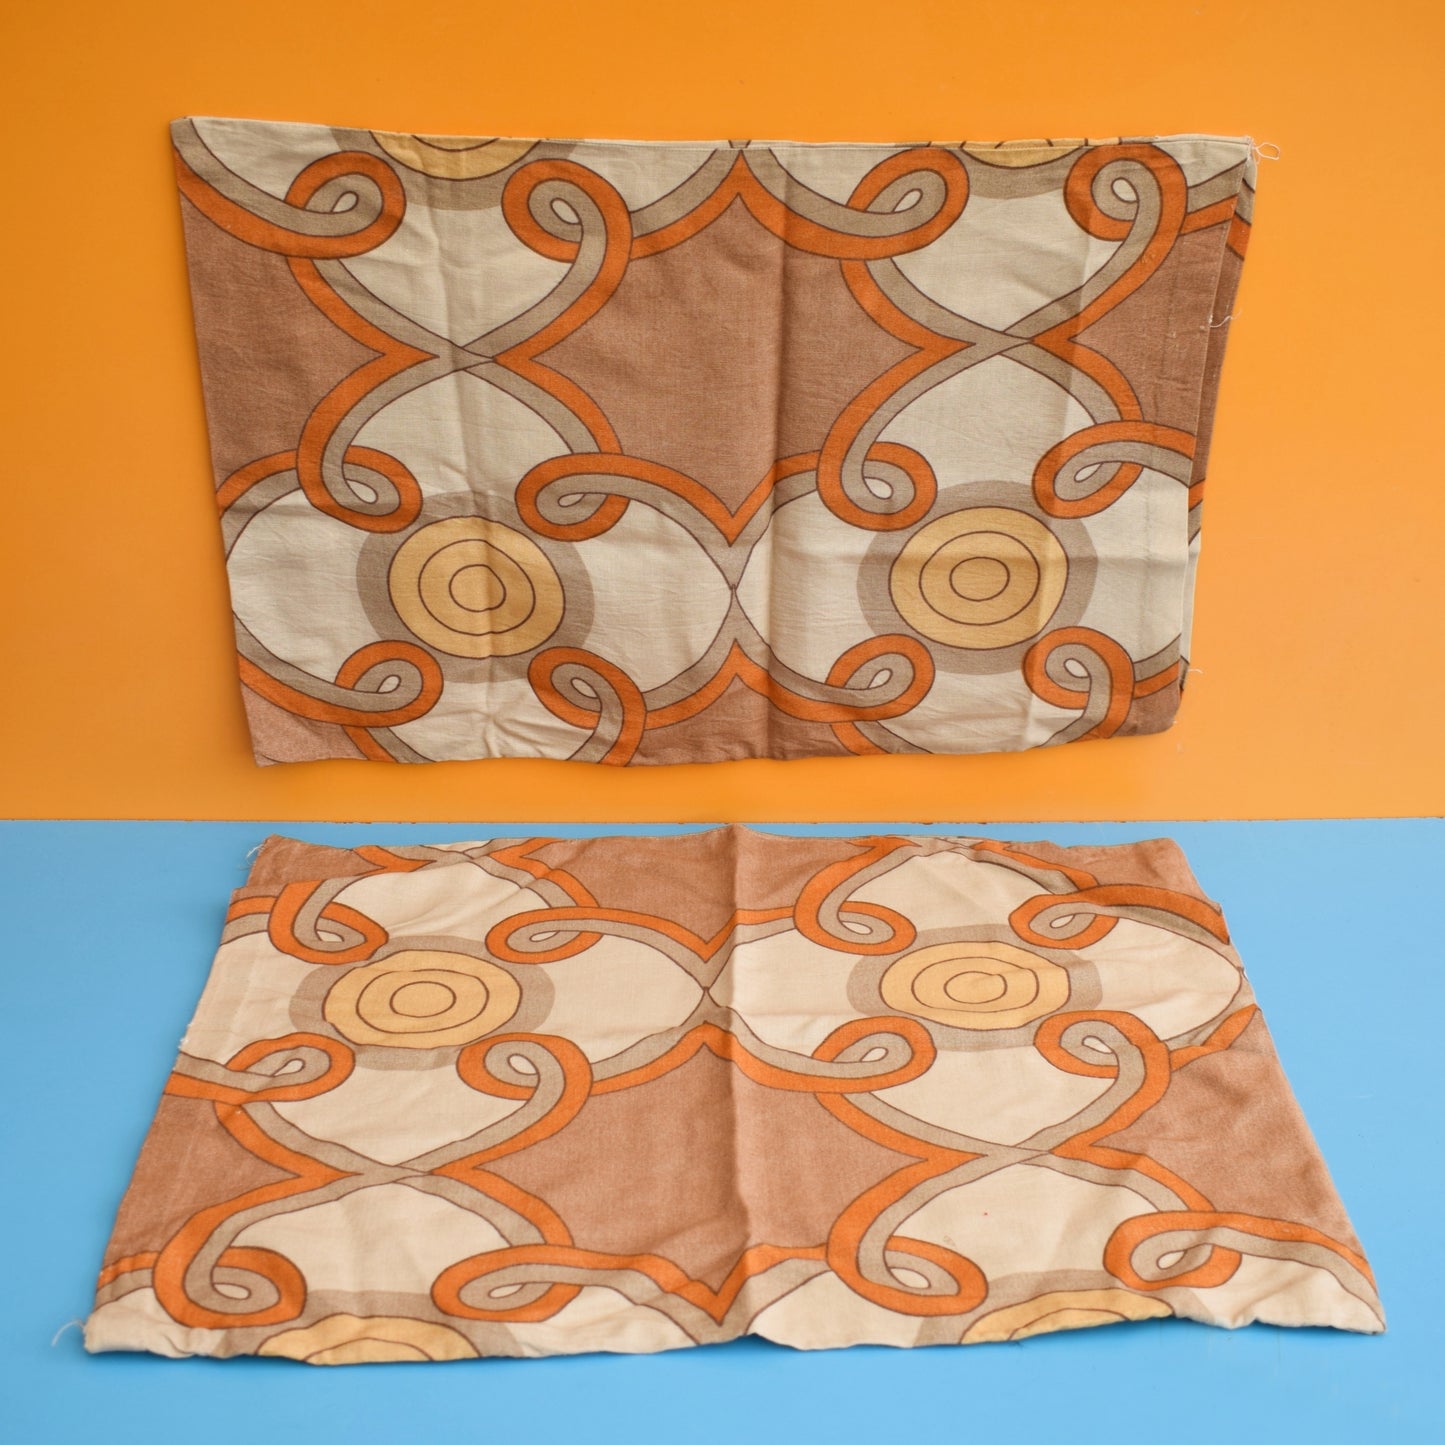 Vintage 1960s Handmade Pillow Cases / Cushions - Brown Geometric